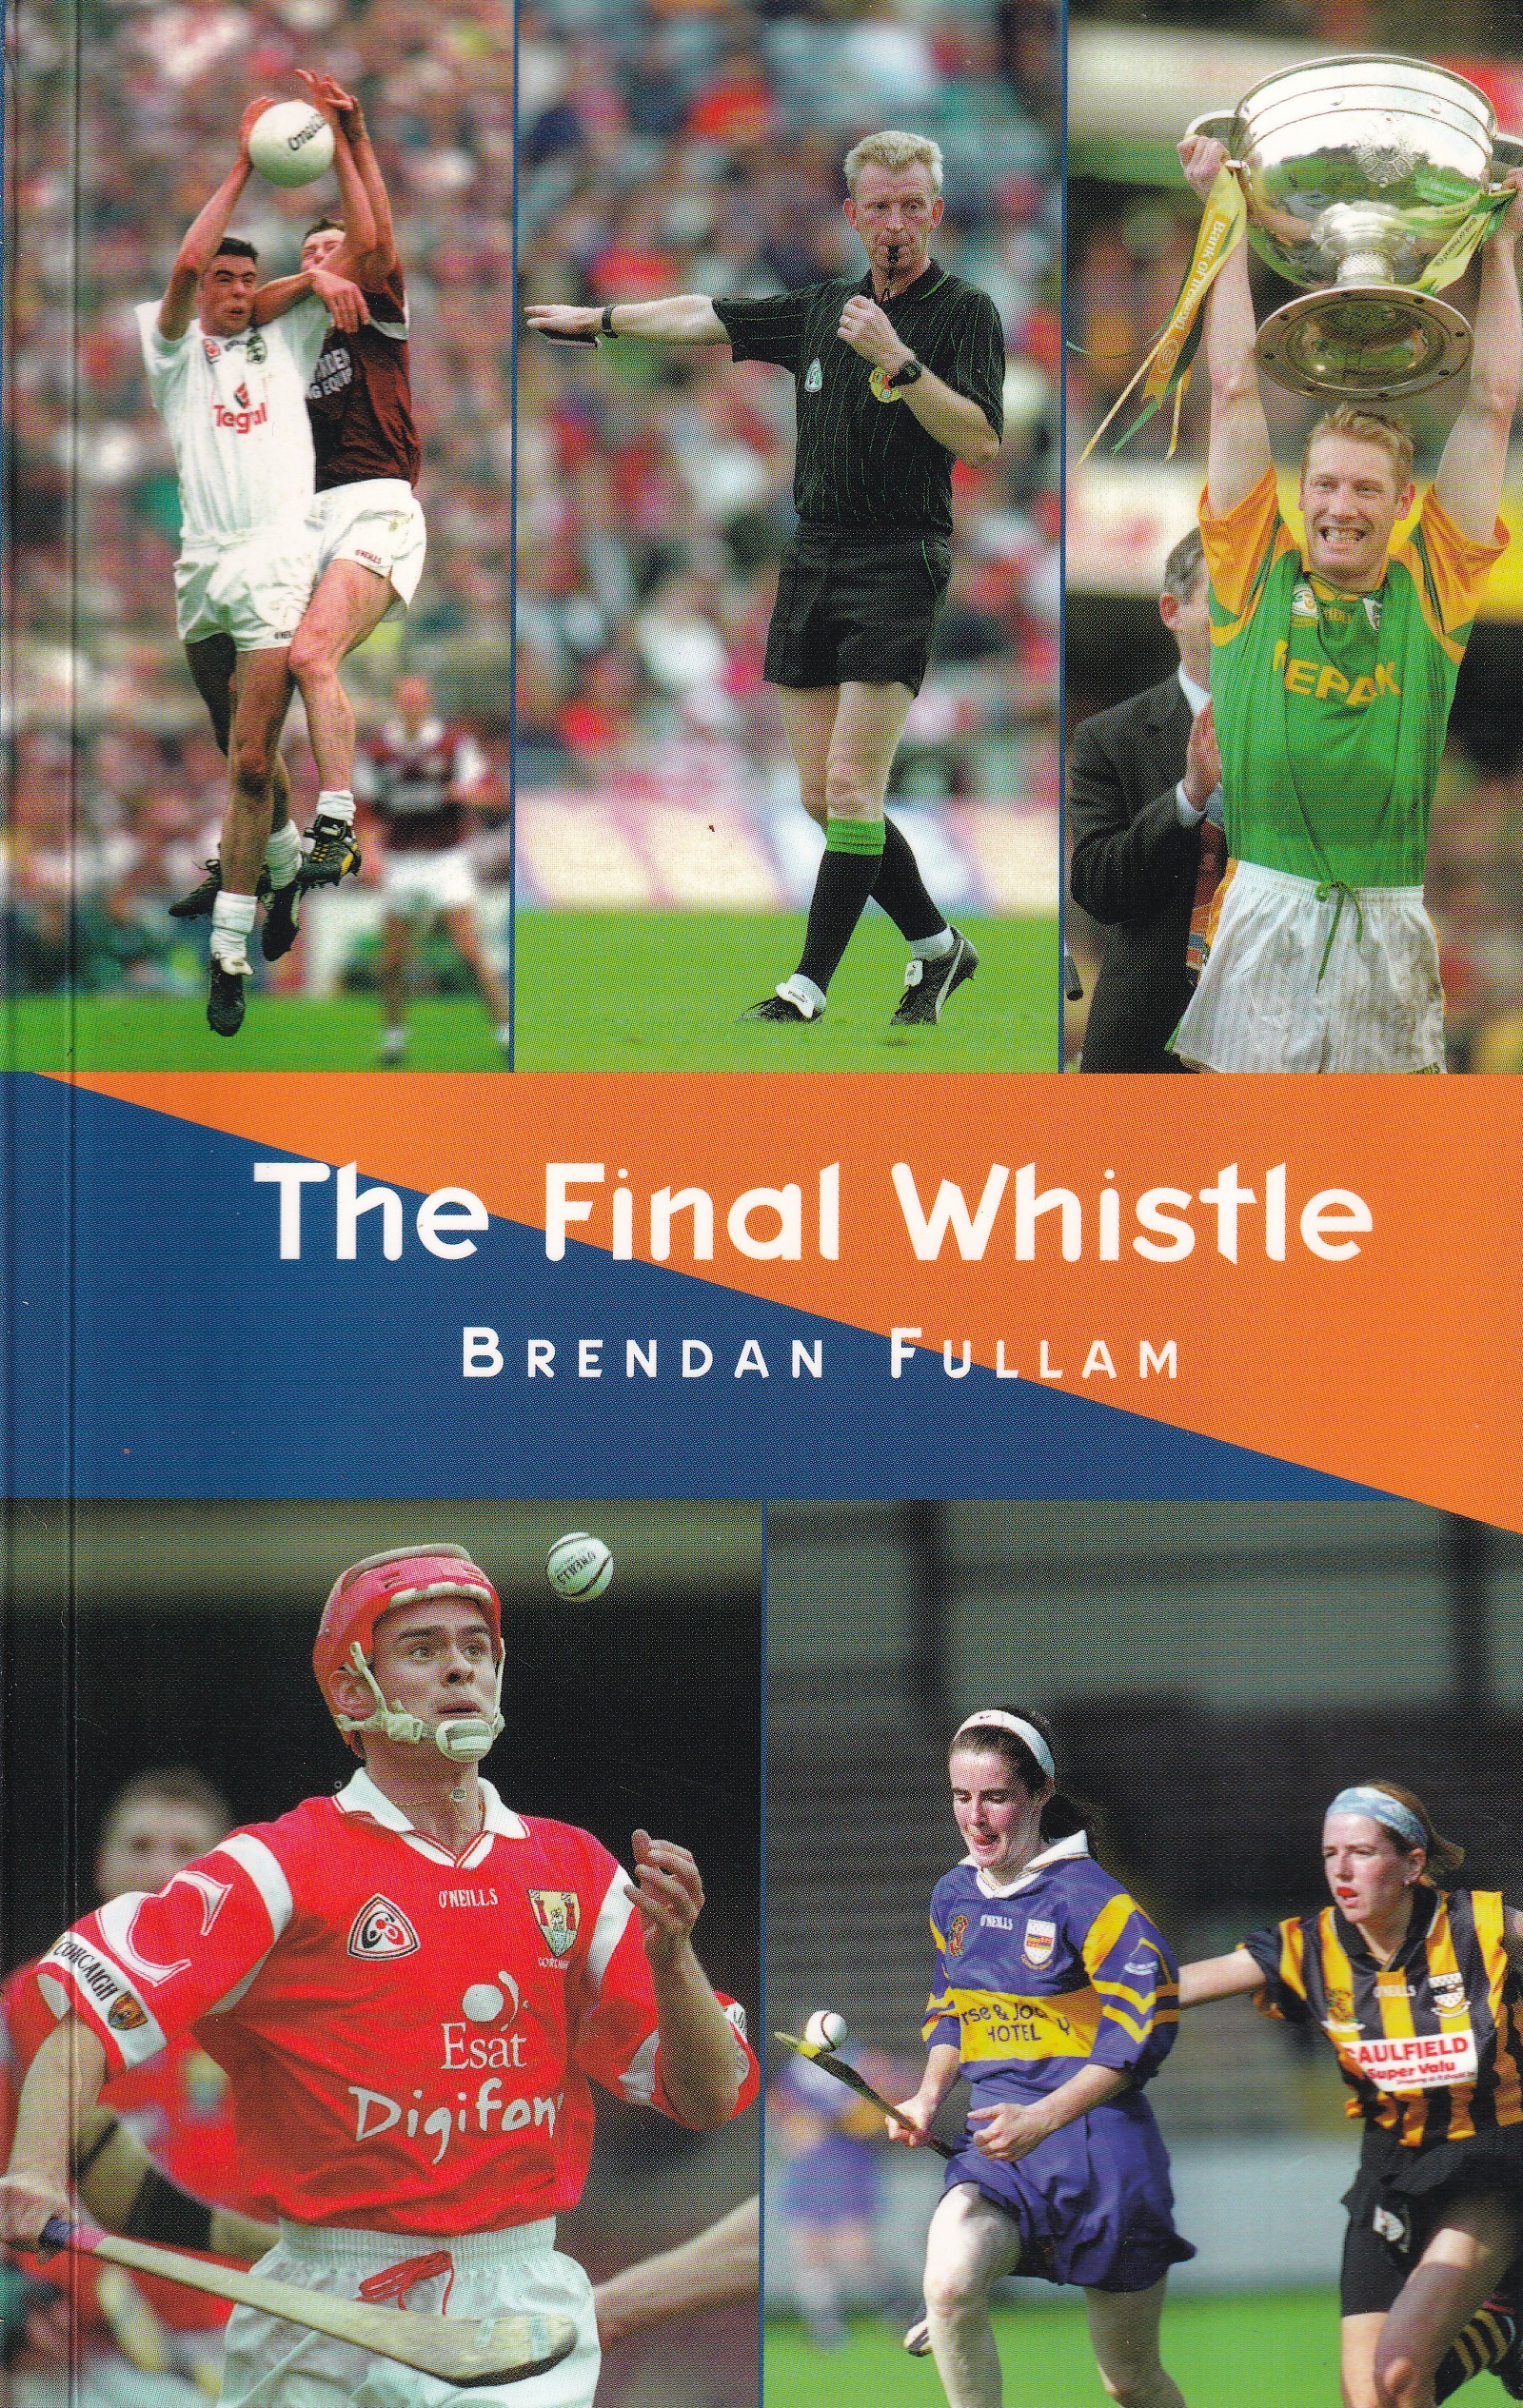 The Final Whistle by Brendan Fullam